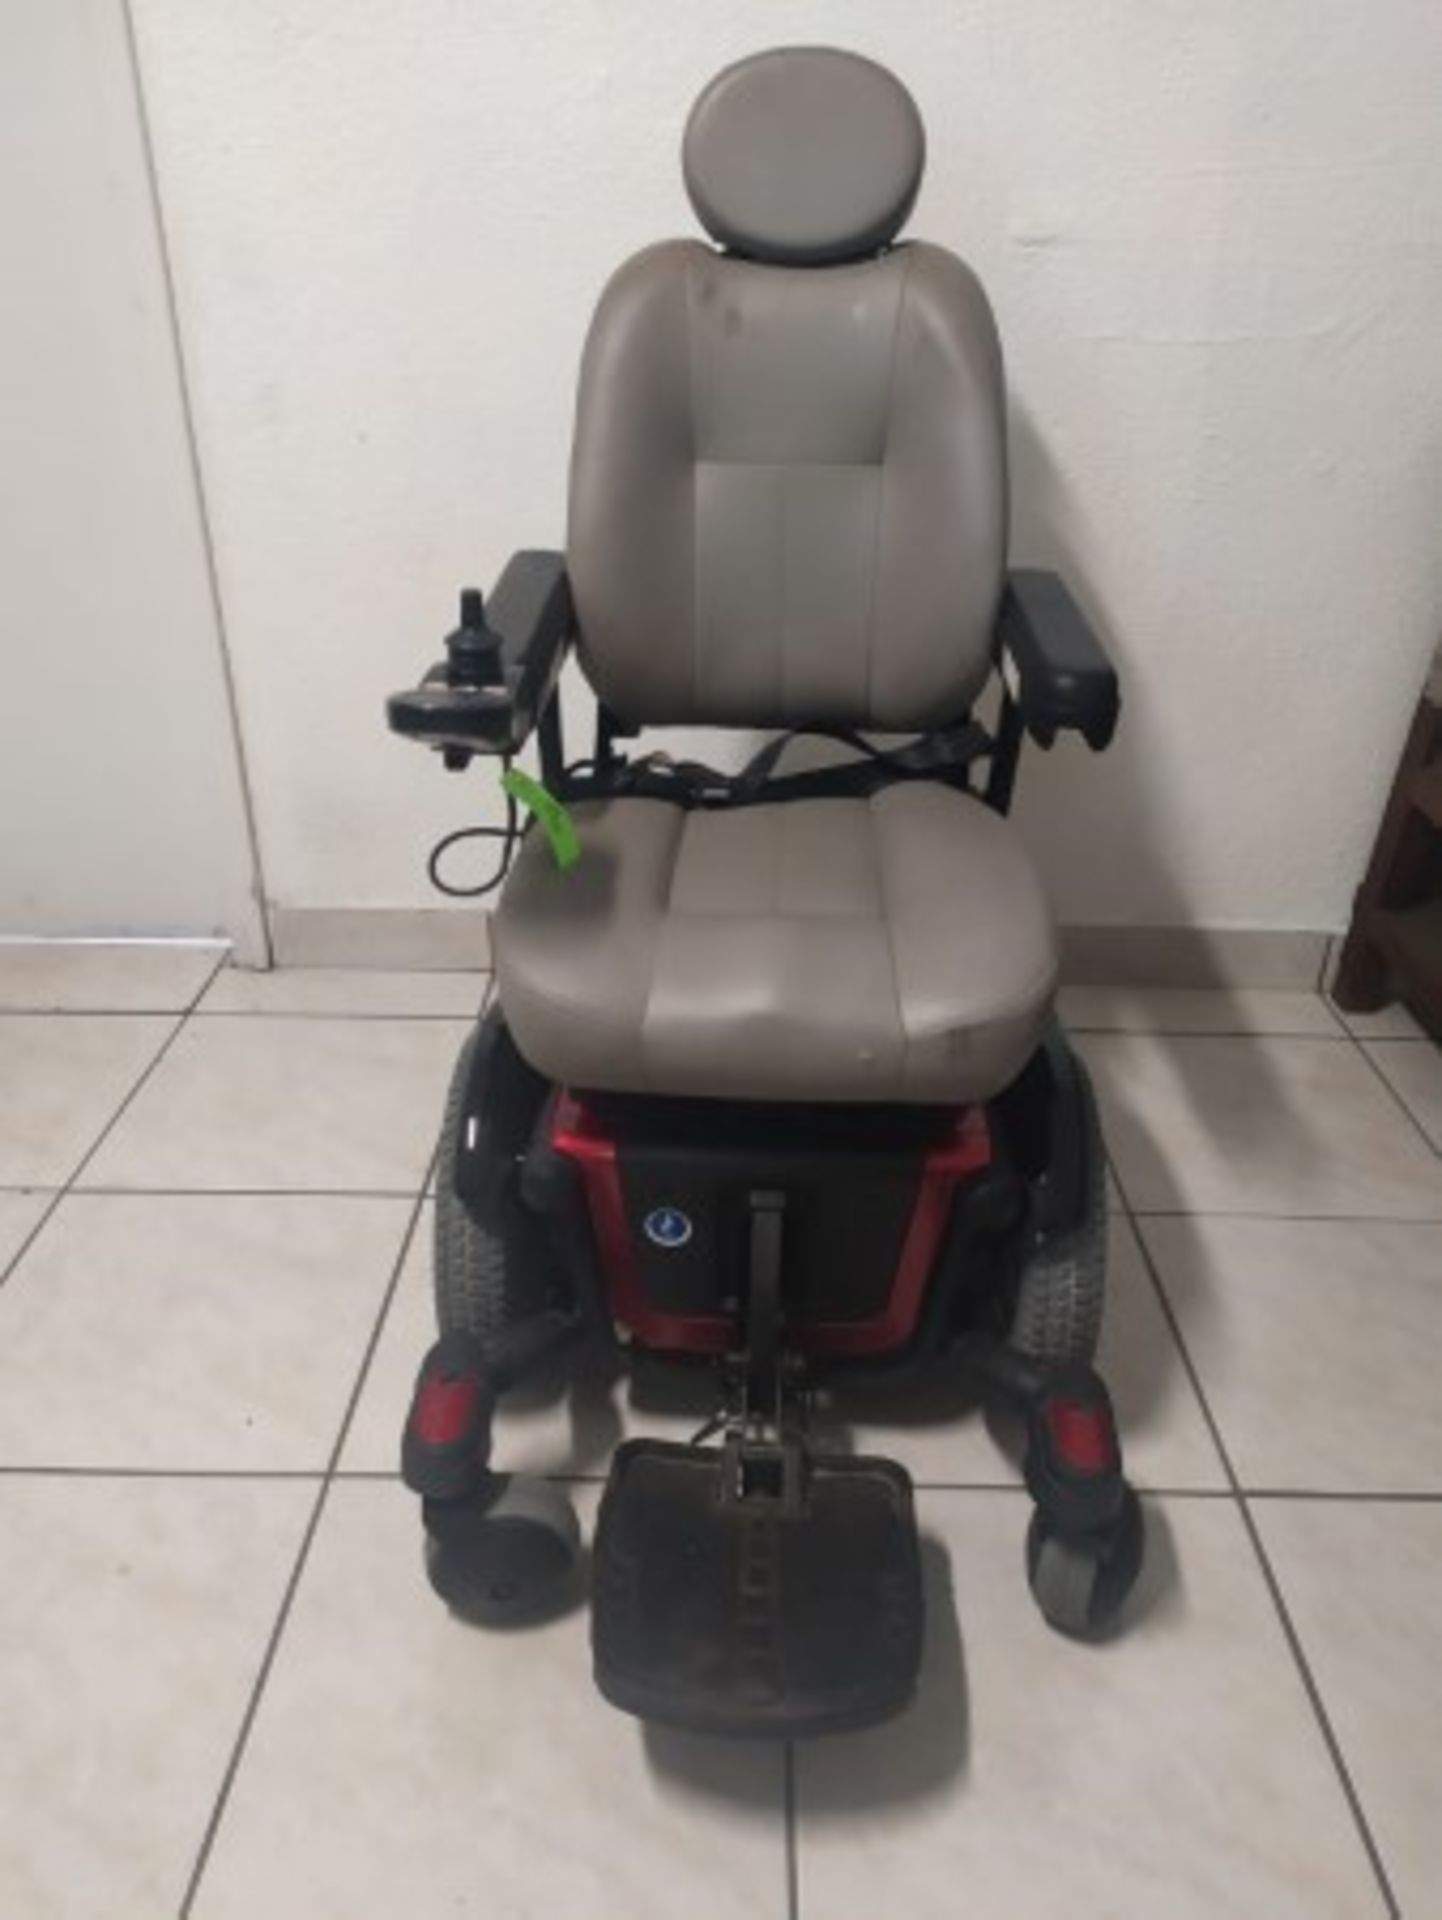 2017 QUANTUM 600 6-WHEEL POWER CHAIR WITH JOYSTICK CONTROL - RED - 400LB CAPACITY - SERIAL No. J5701 - Image 2 of 4